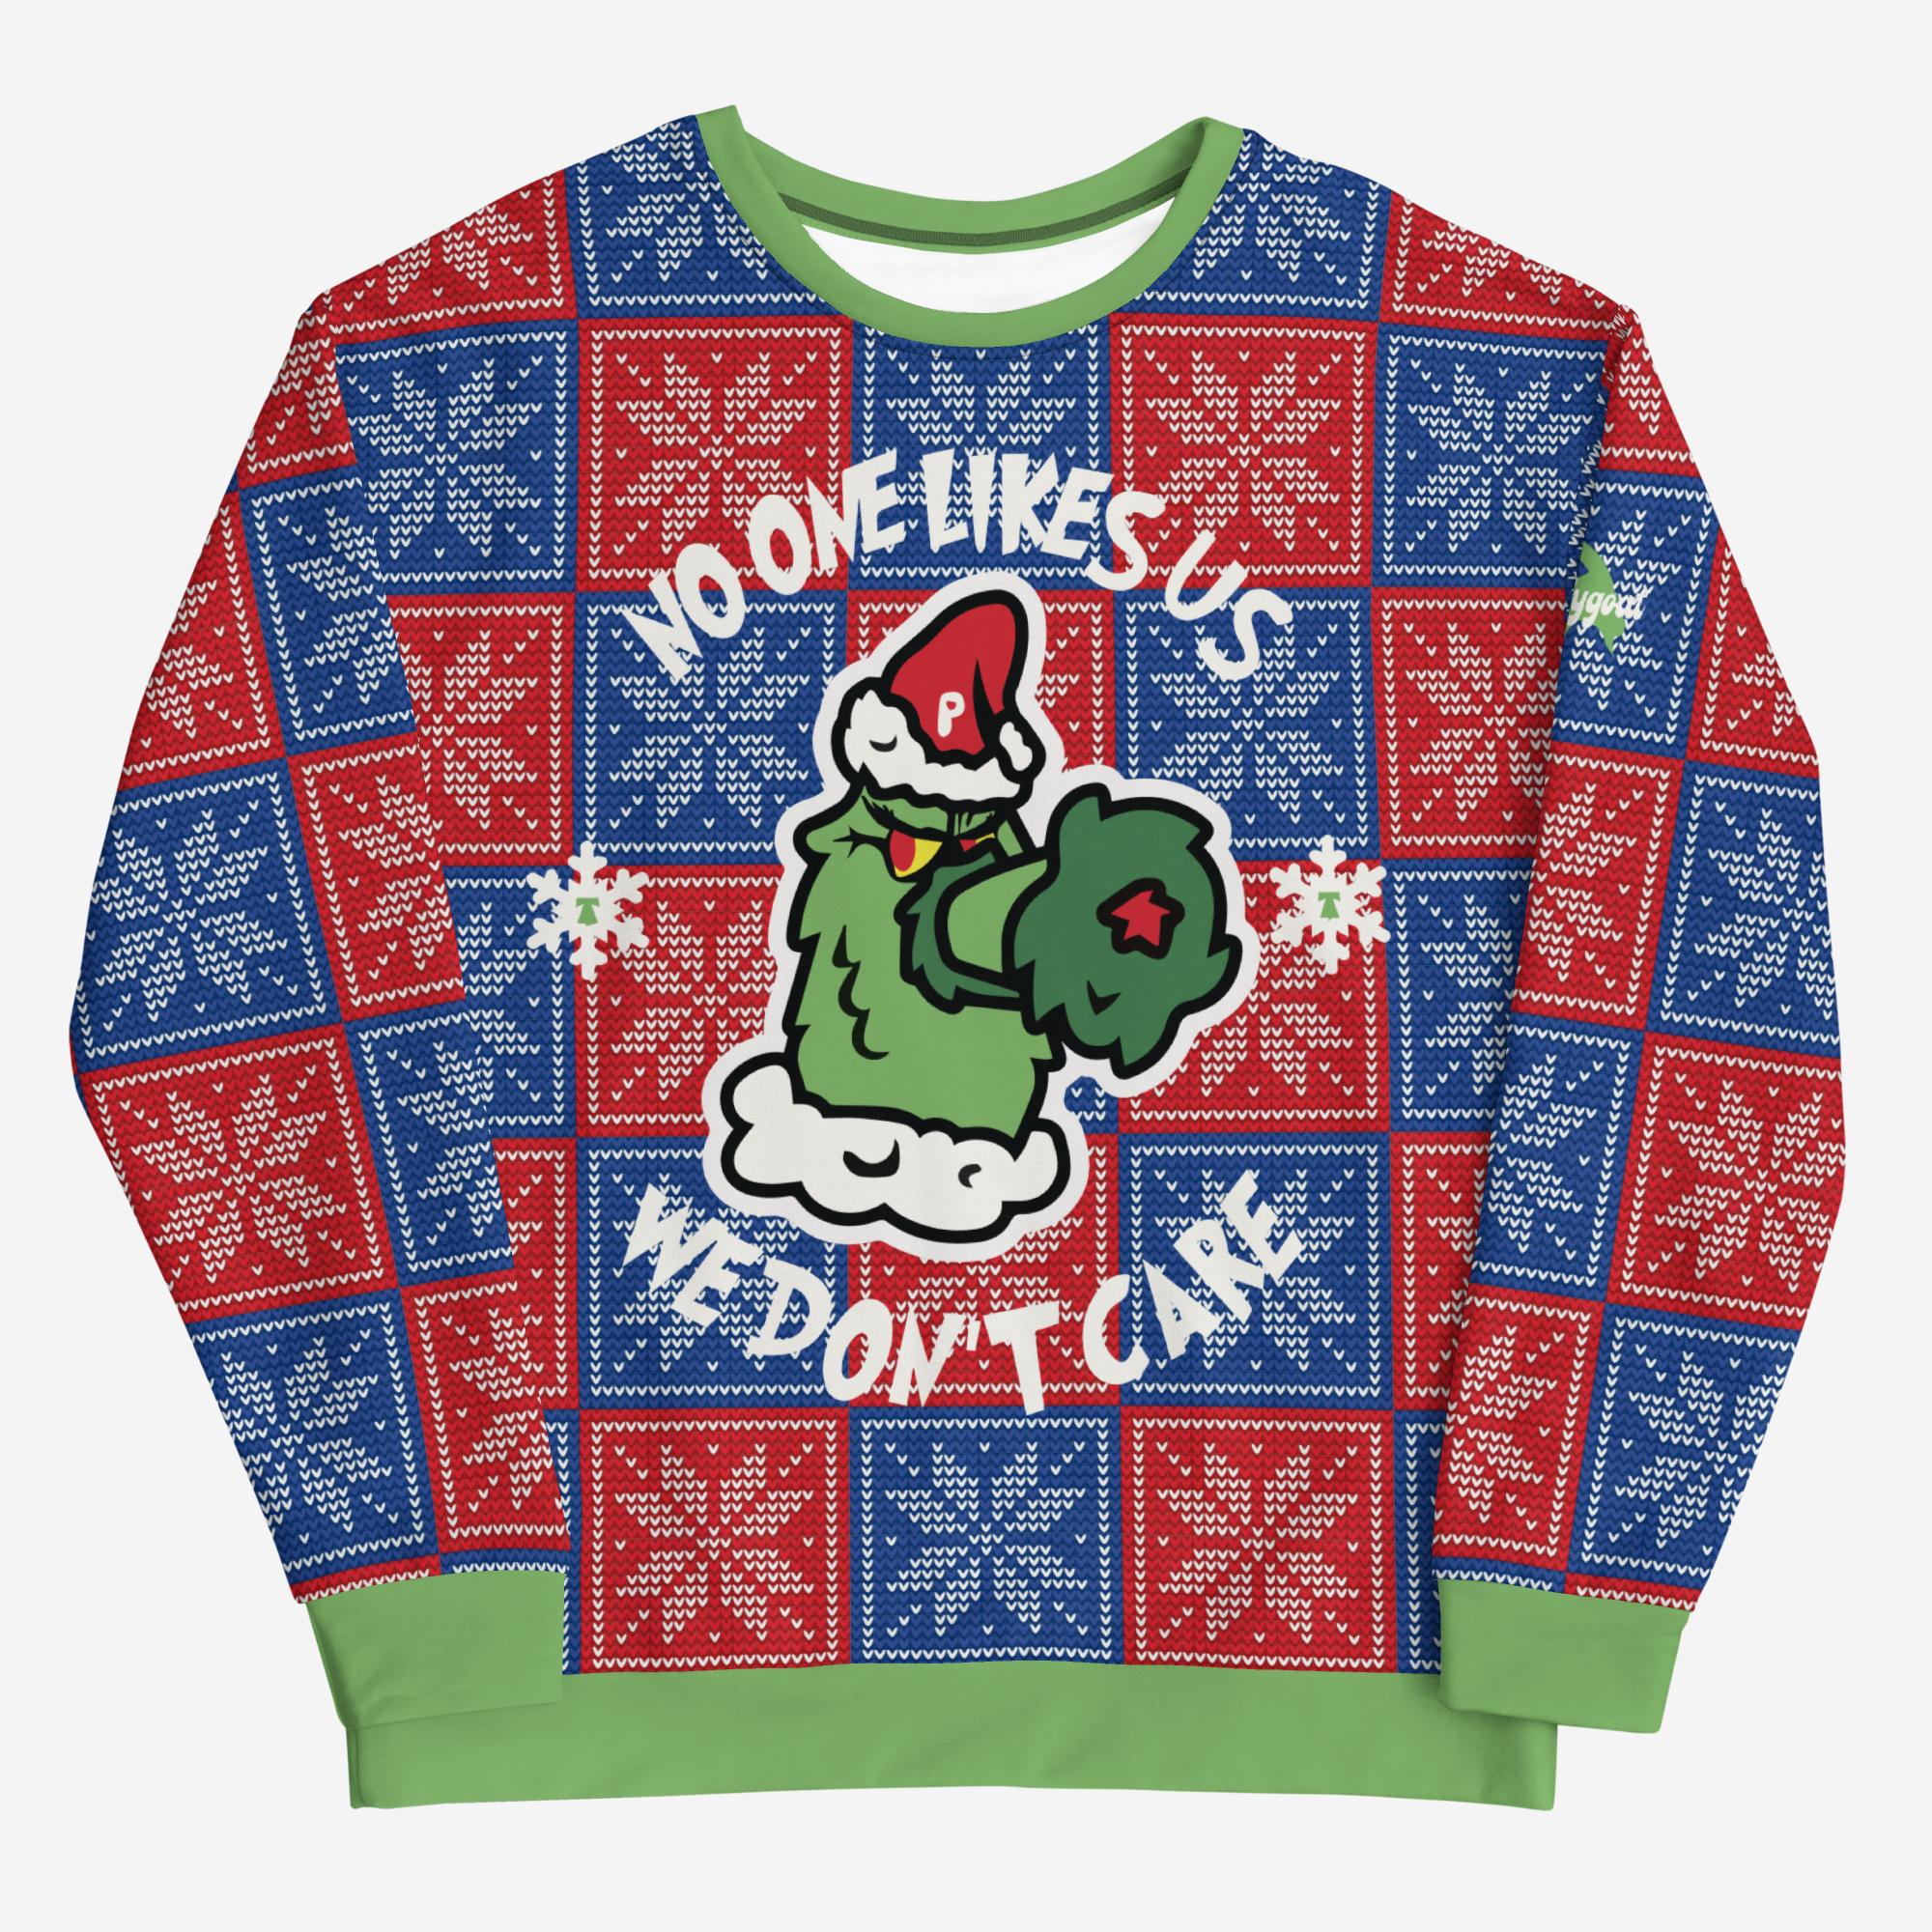 "Grinchy Phanatic" All-Over Ugly Christmas Sweater